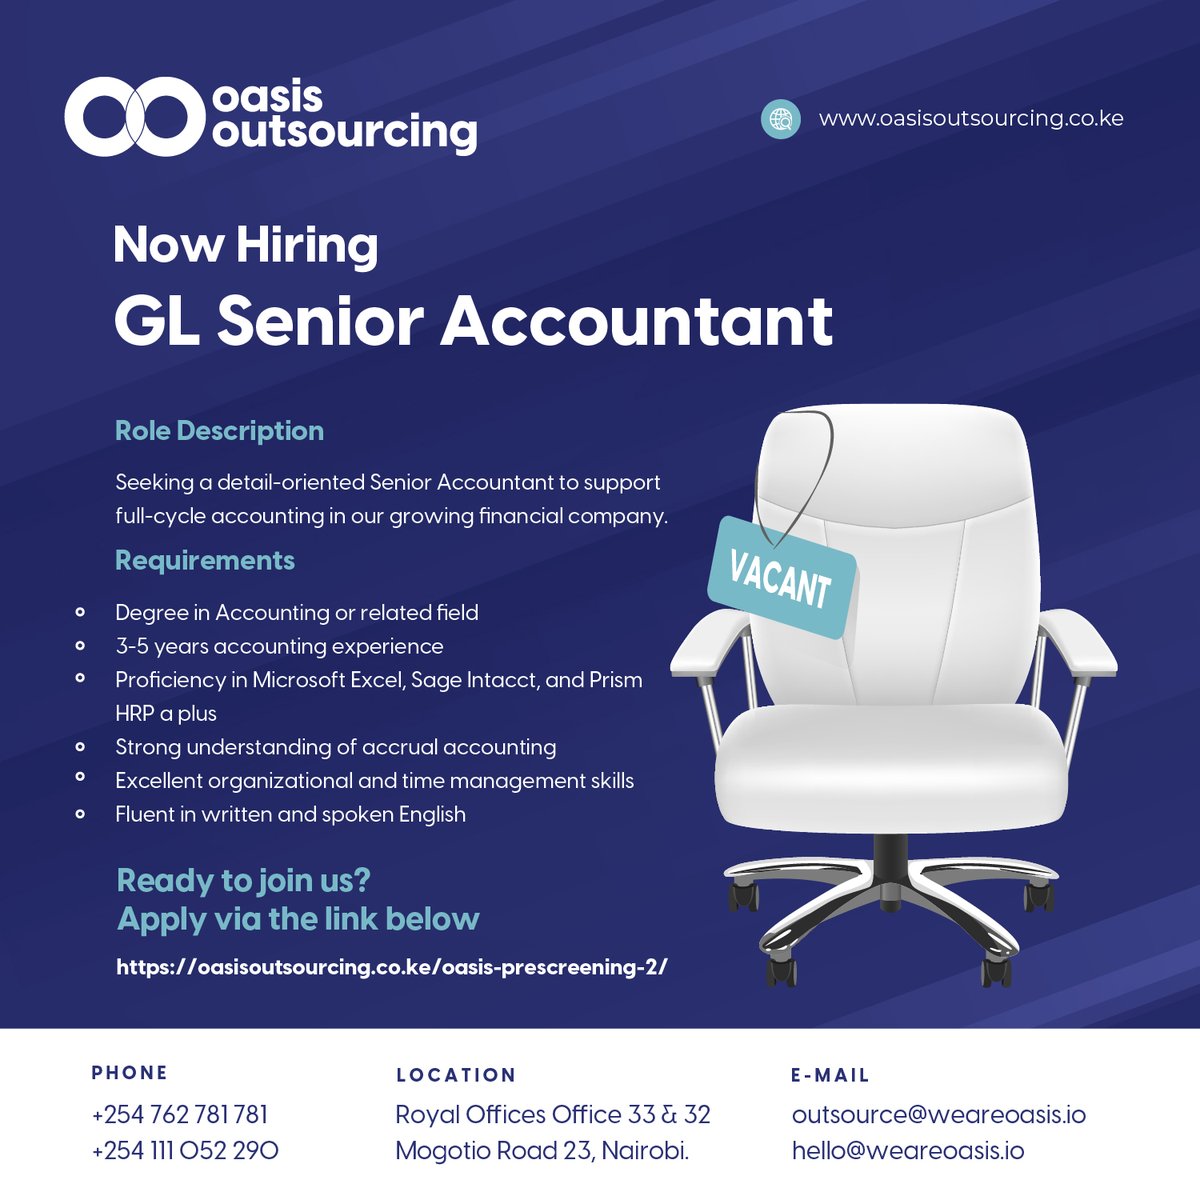 Ready to elevate your career in accounting? Join us as a GL Senior Accountant and step into your next career milestone. Apply through the link below and become part of a team that values expertise and dedication.
lnkd.in/der623PZ  #CareerOpportunity #ApplyNow #WeAreOasis